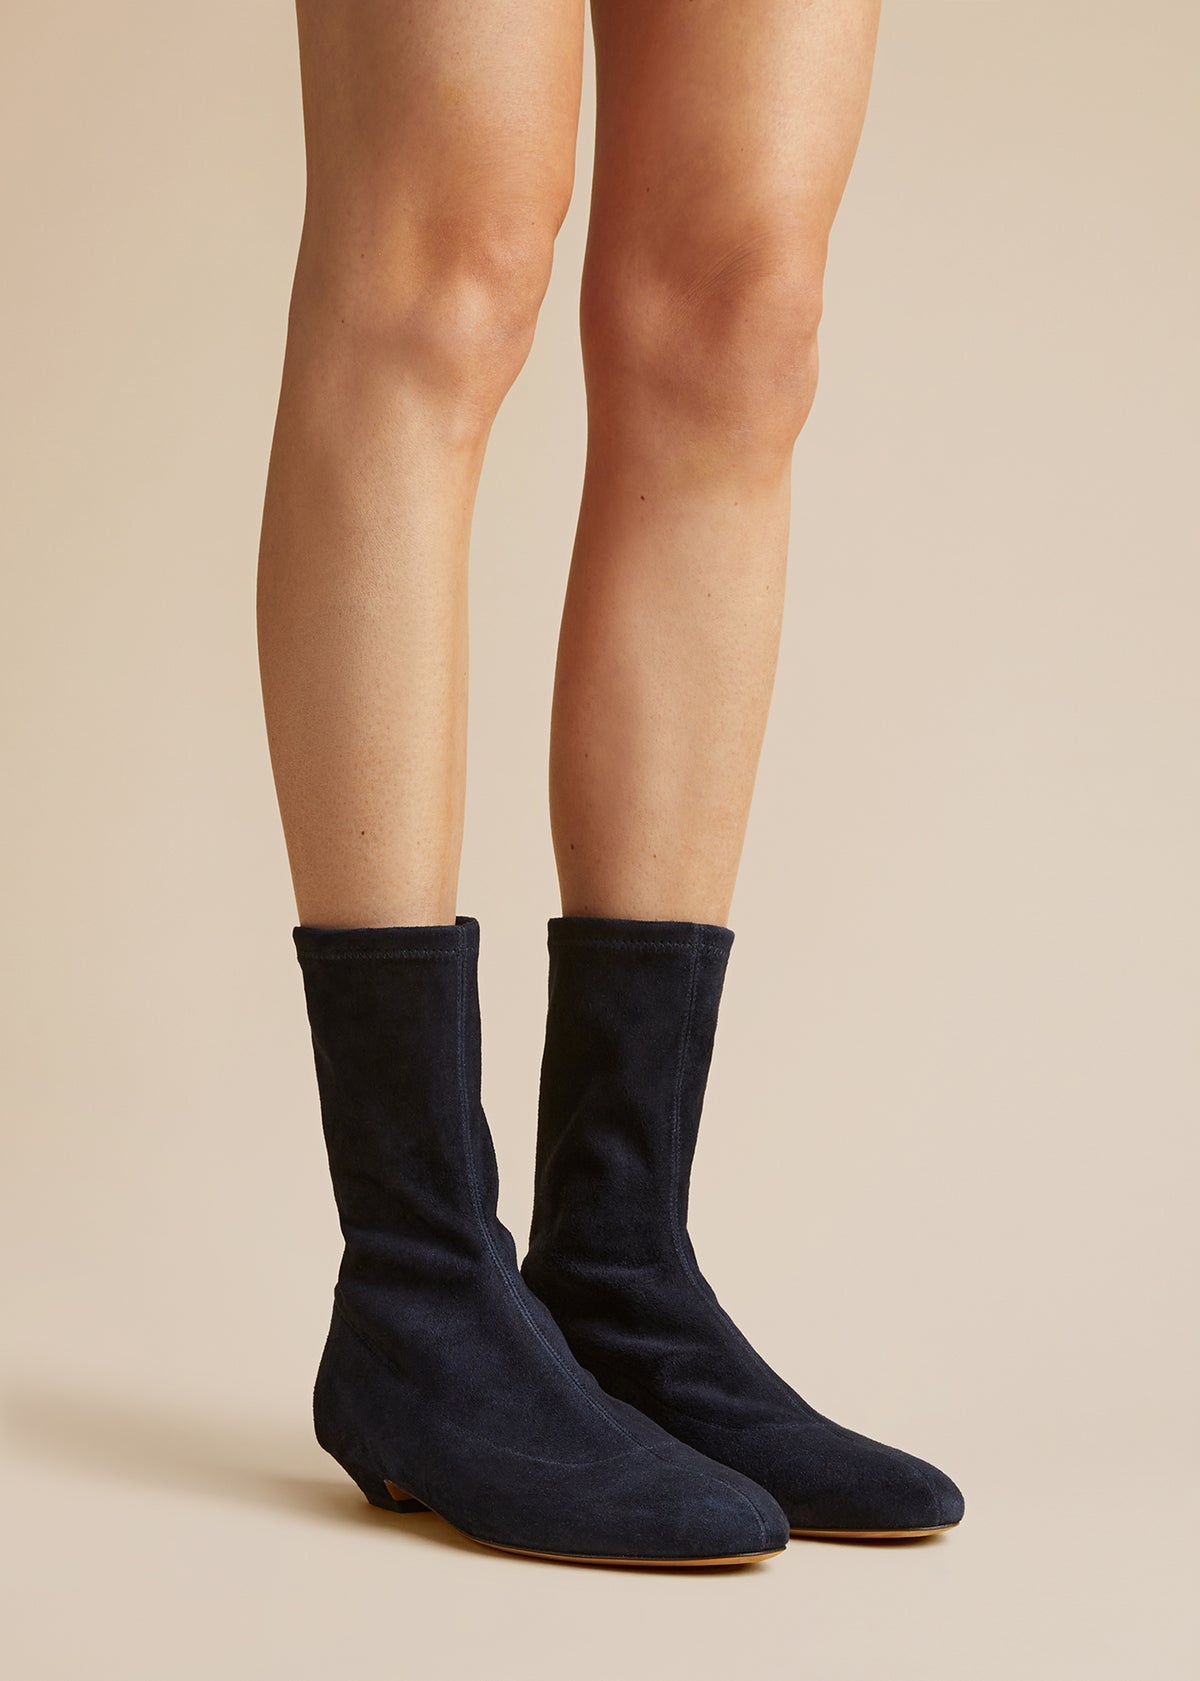 The Apollo Ankle Boot in Midnight Suede - 4